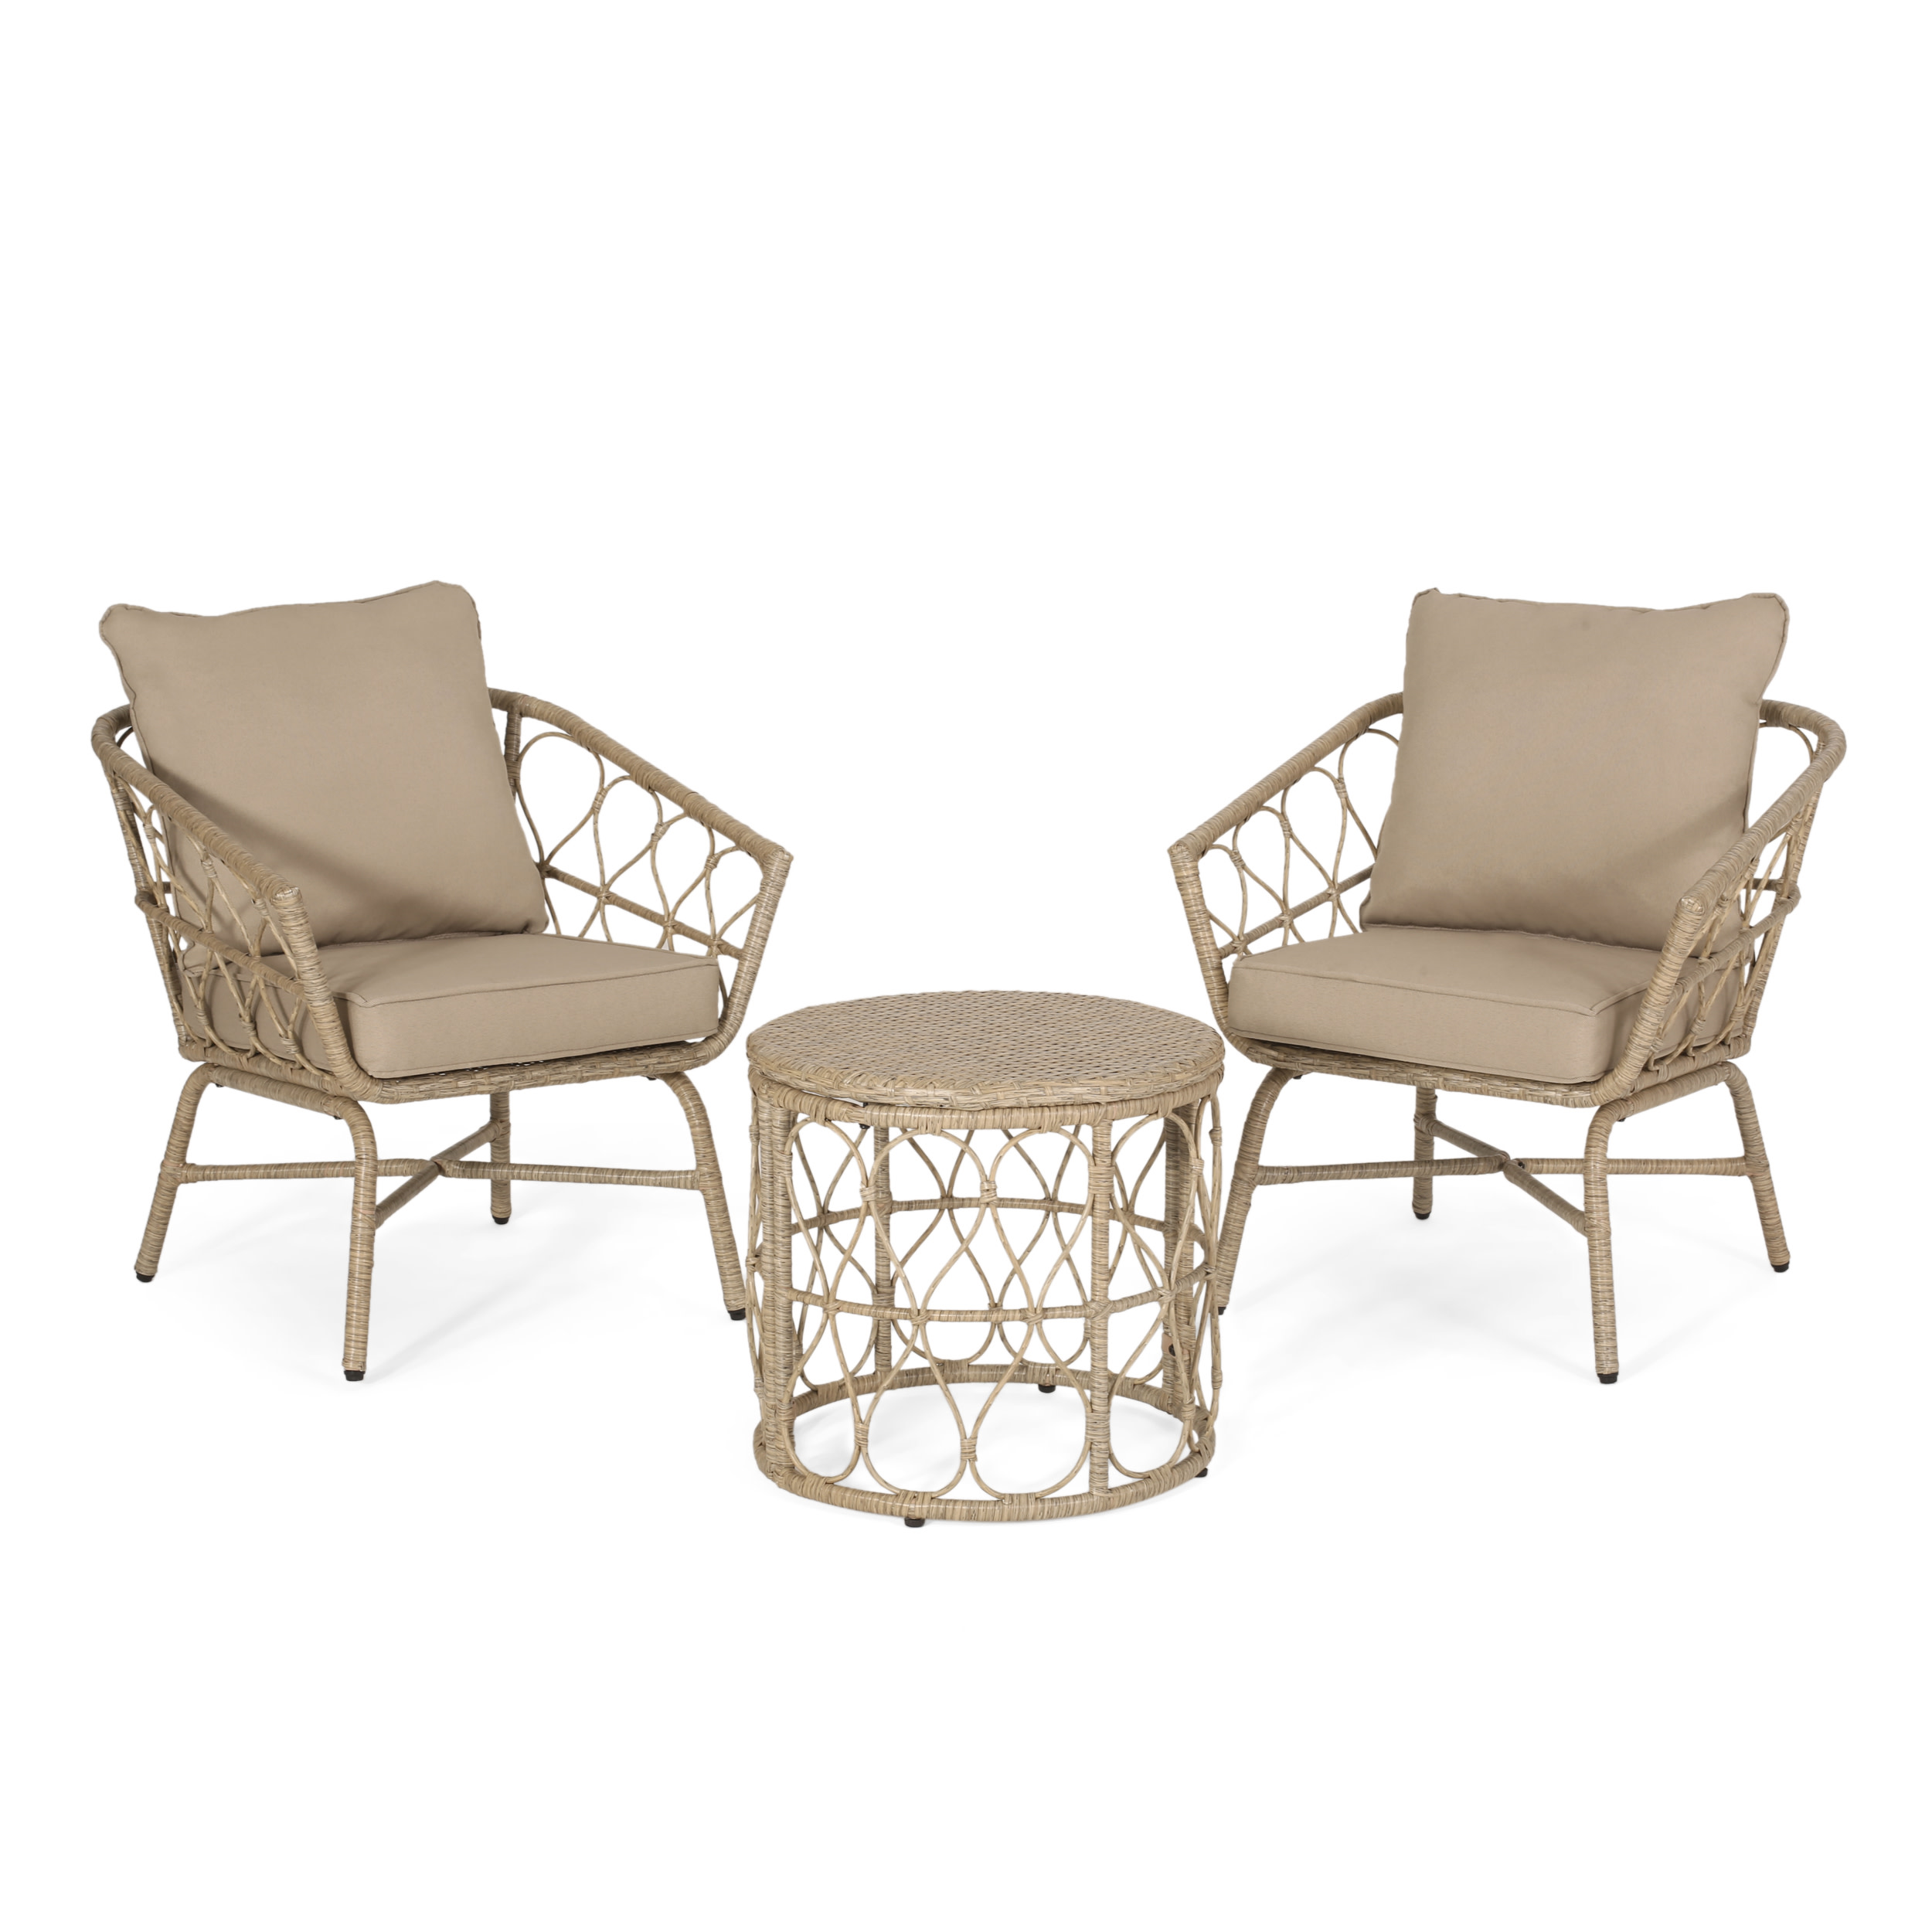 GDF Studio Colmar Outdoor Wicker 3 Piece Chat Set with Cushions, Light Brown and Beige - image 1 of 8